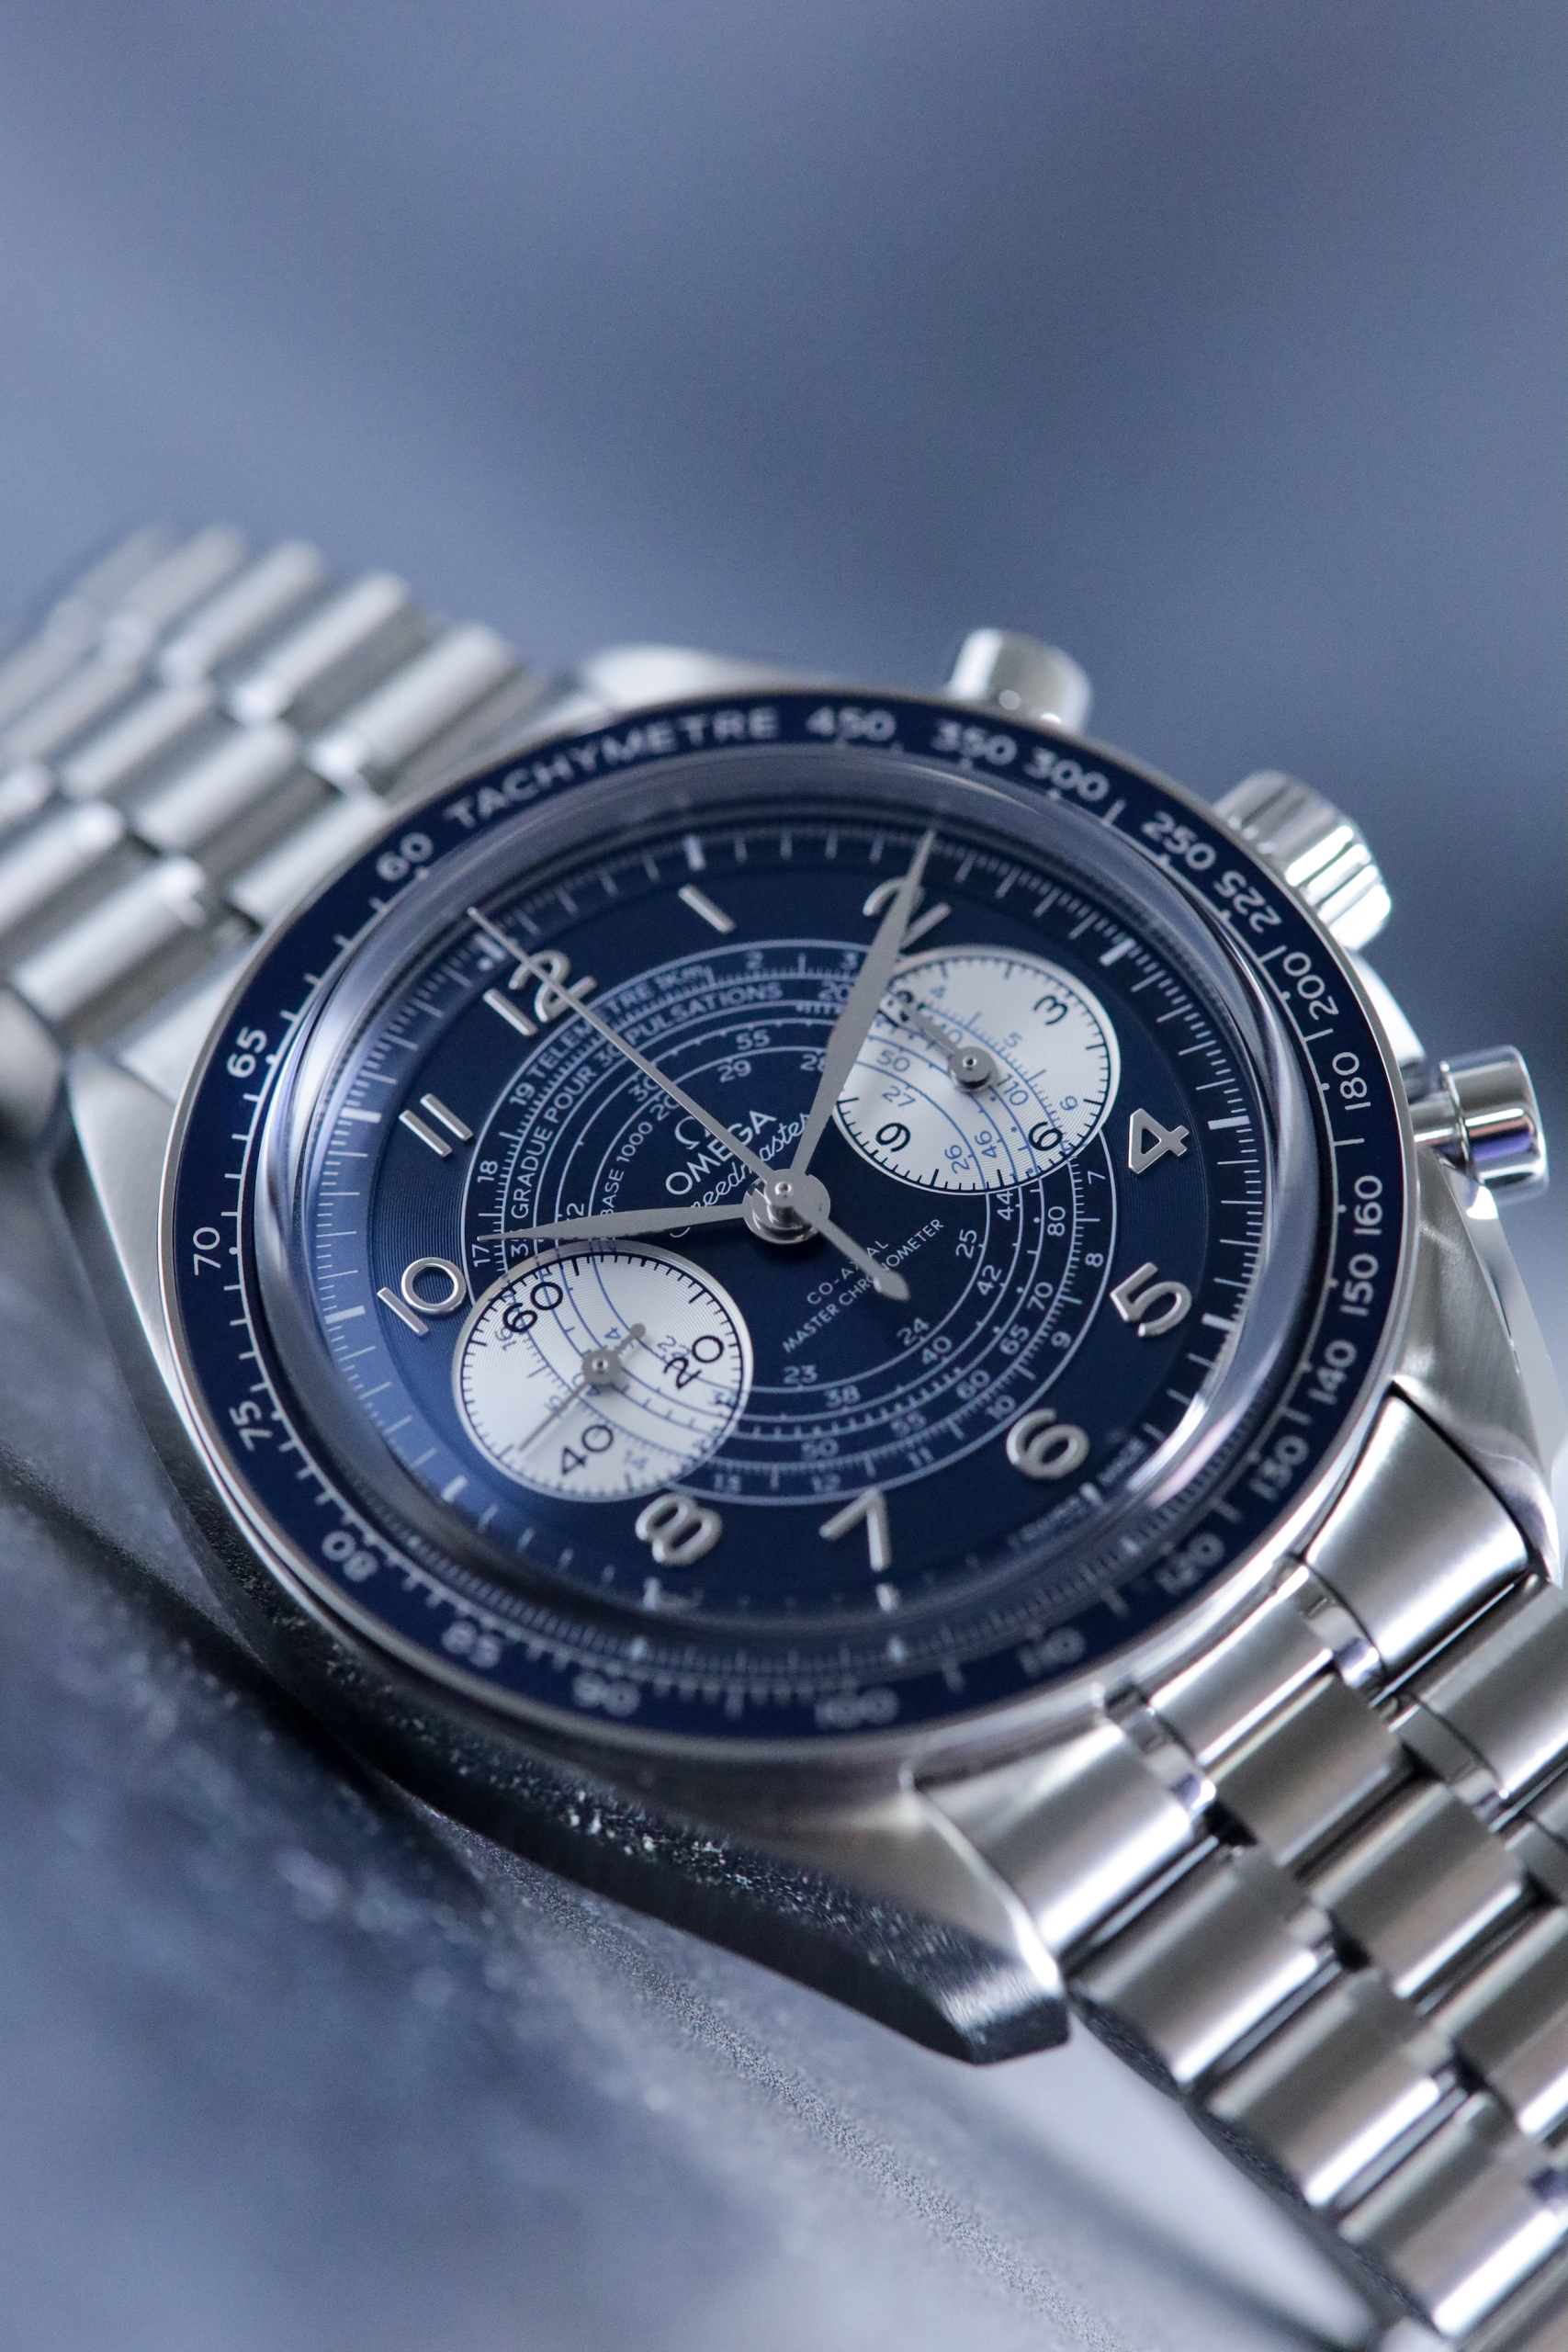 Omega Speedmaster Co-Axial Chronograph Watch Review